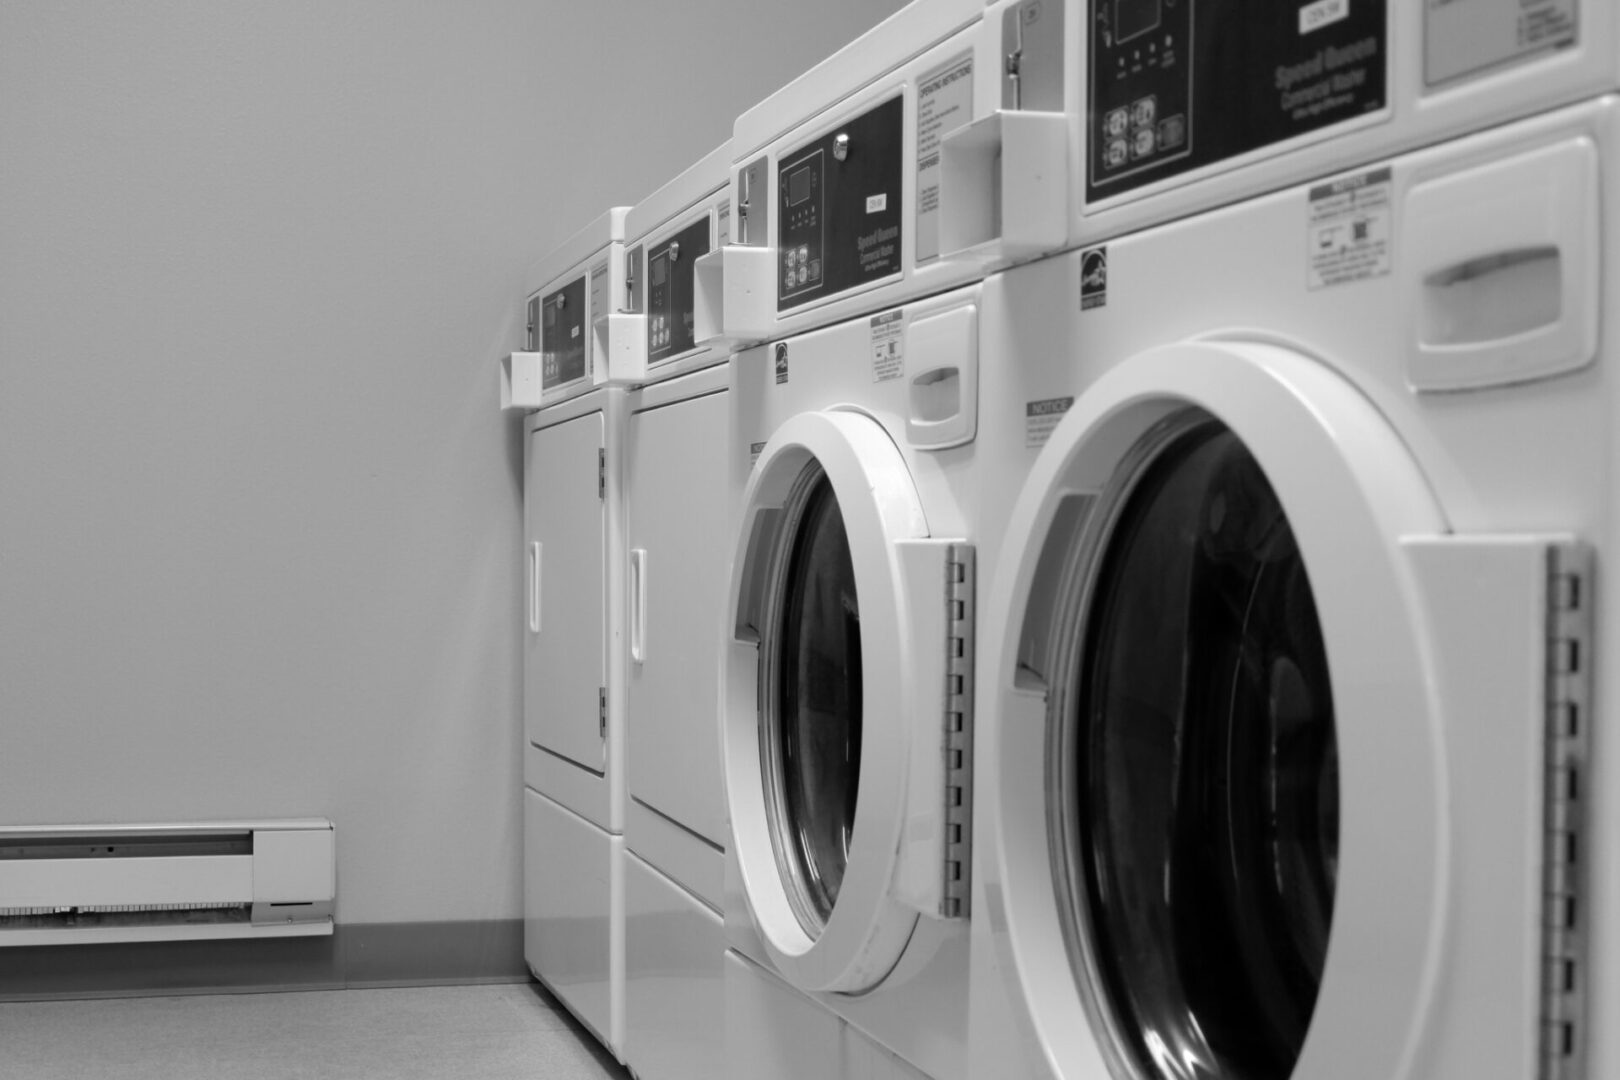 A row of white washing machines in a room.